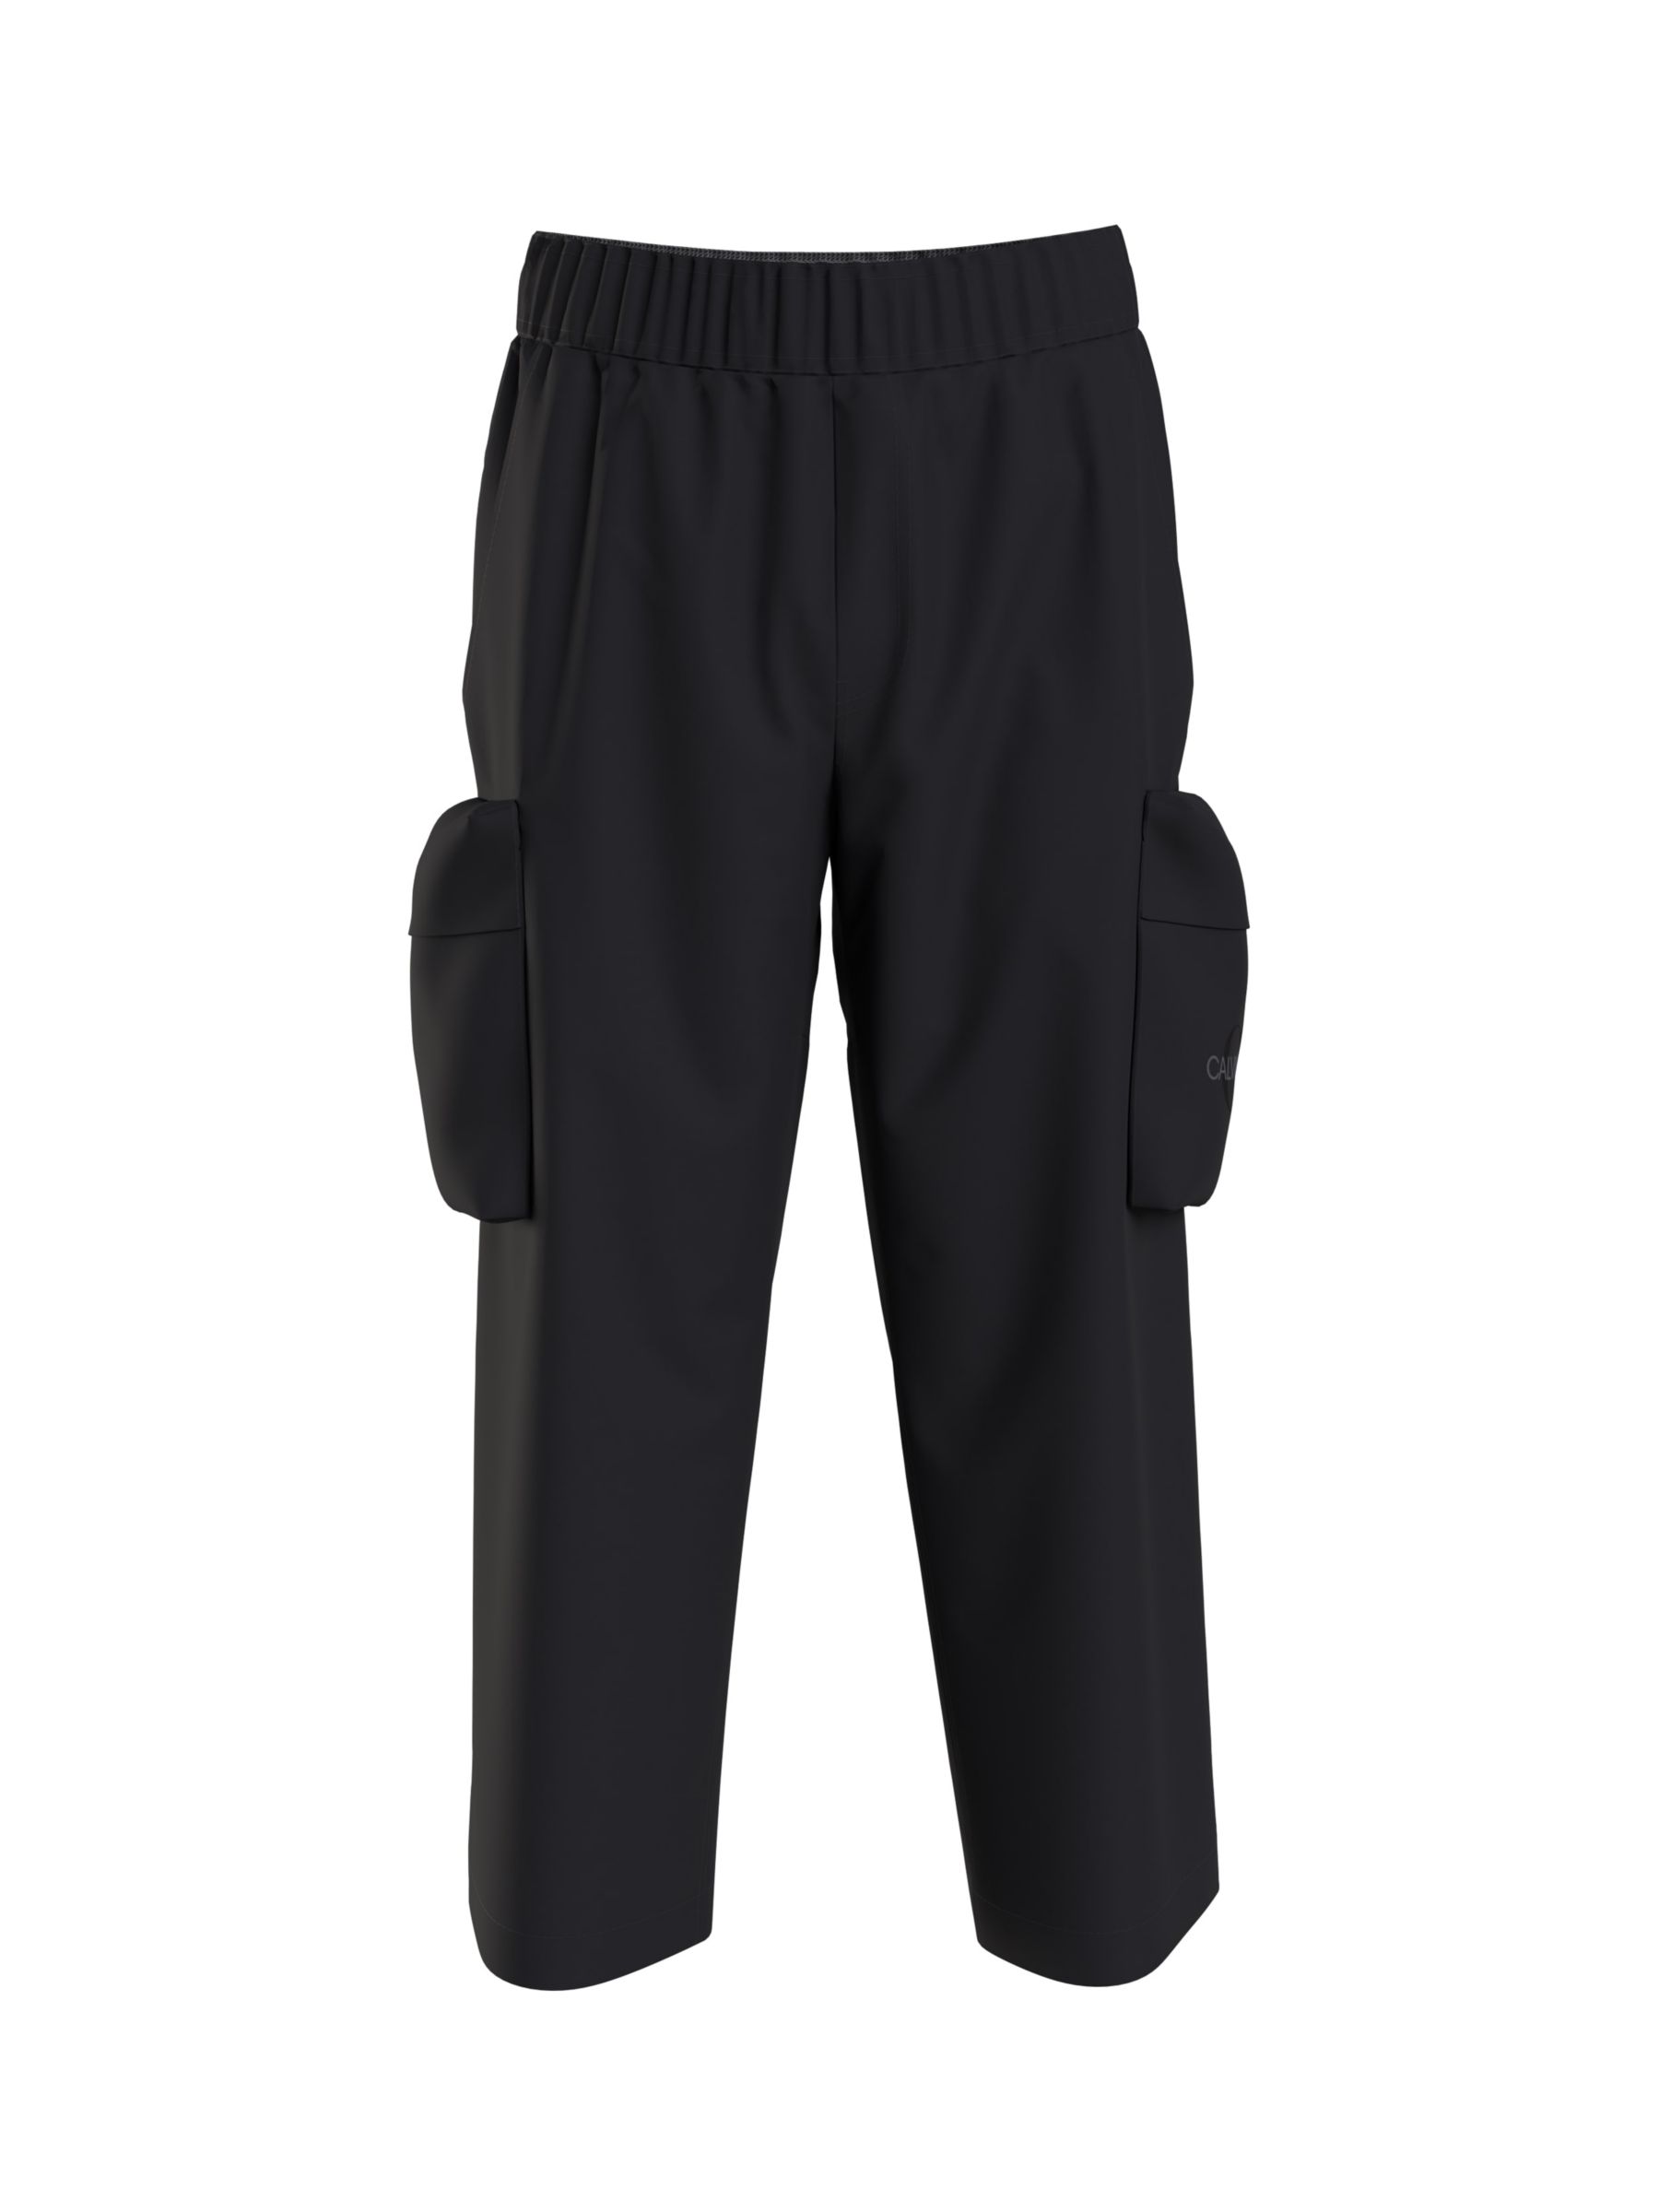 Calvin Klein Jeans Cropped Cargo Trousers, Ck Black, XS